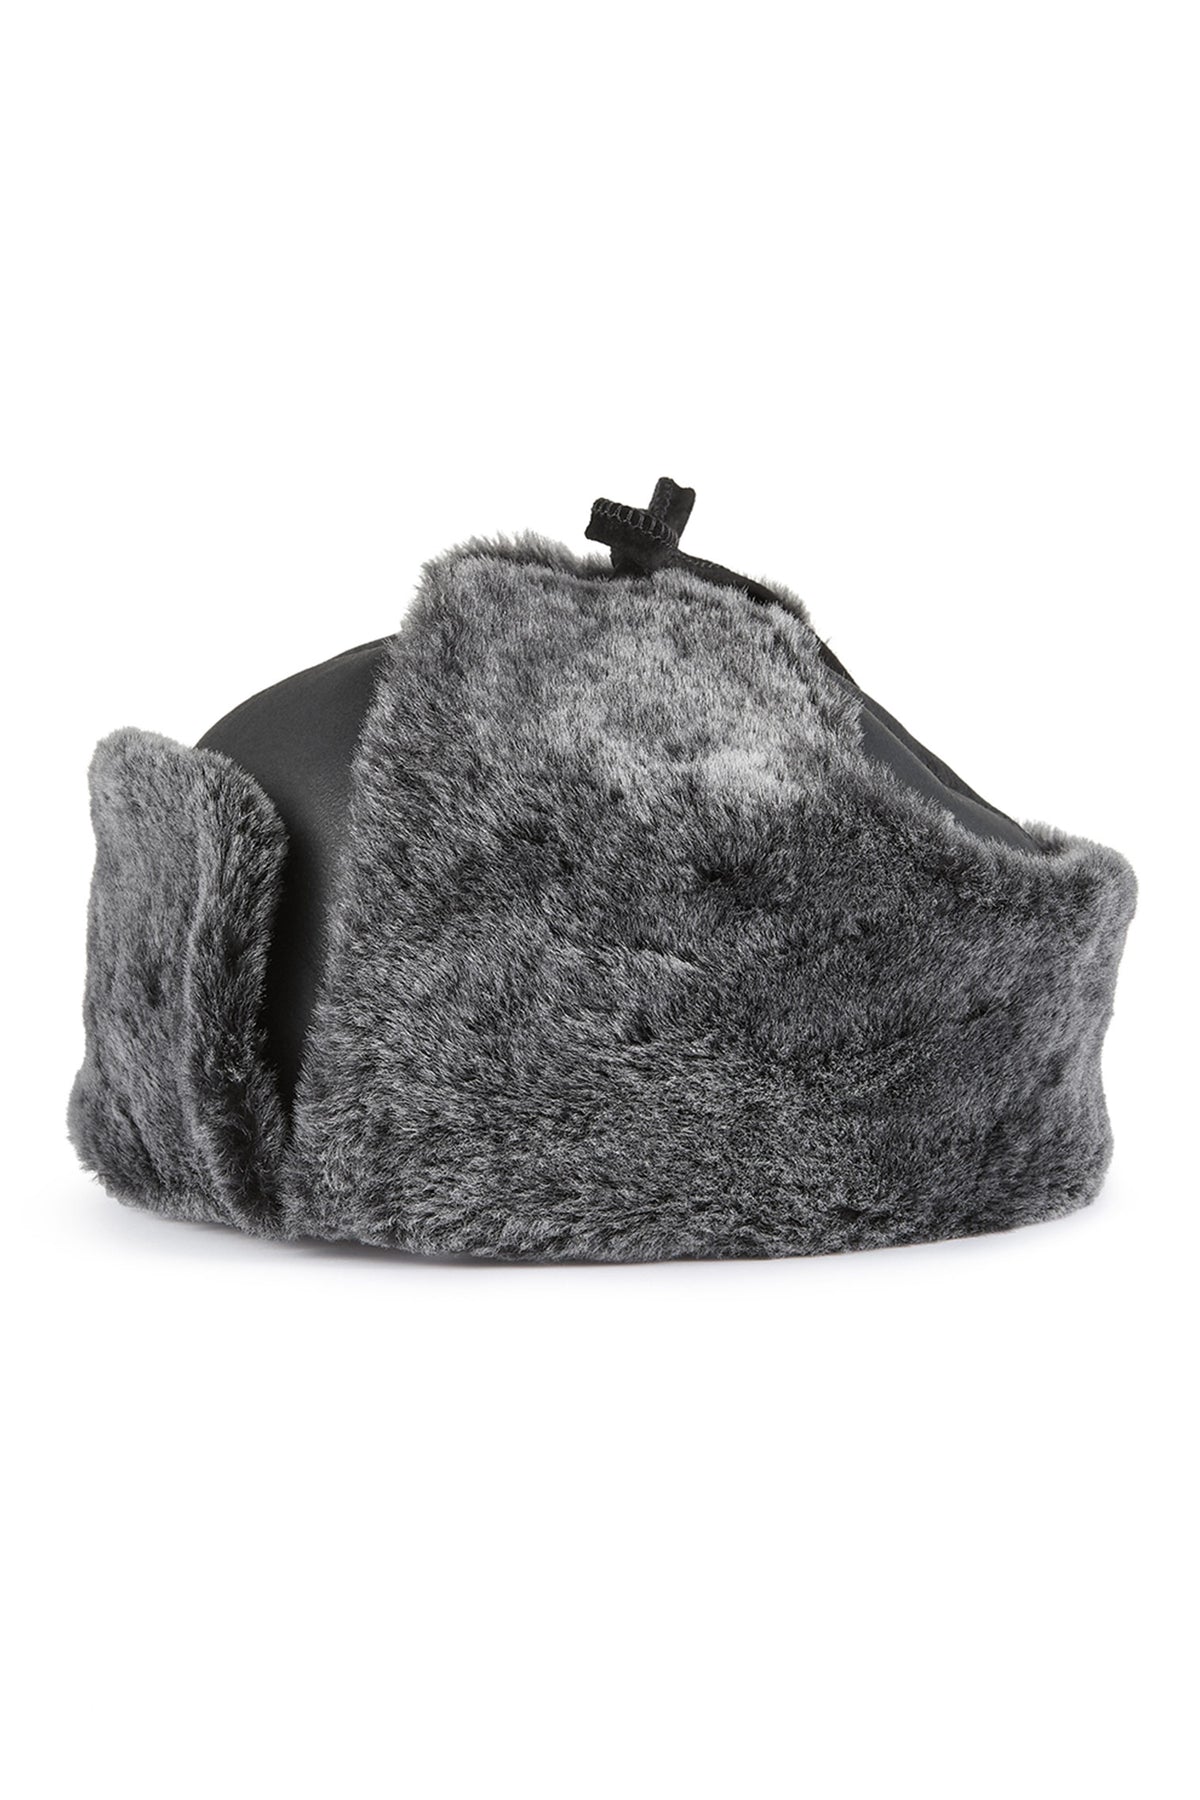 Home Prefer Winter Hat with Brim Earflap Fitted Hat Faux Fur Baseball Cap for Men